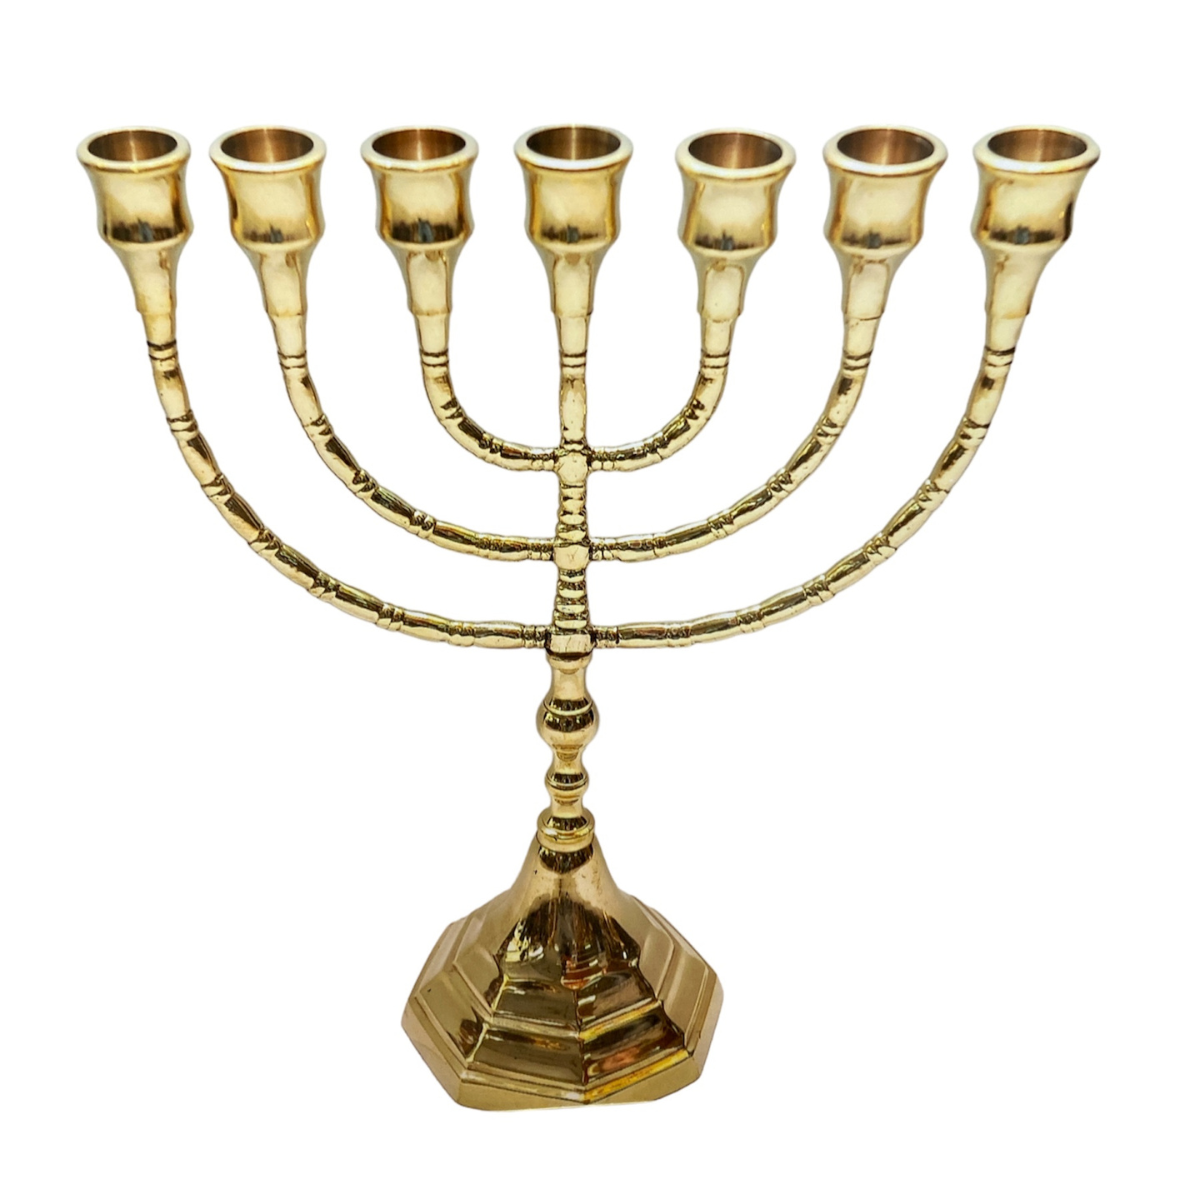 Menorah Silver Plated Candle Holder Judaica 11.8″ / 30 cm